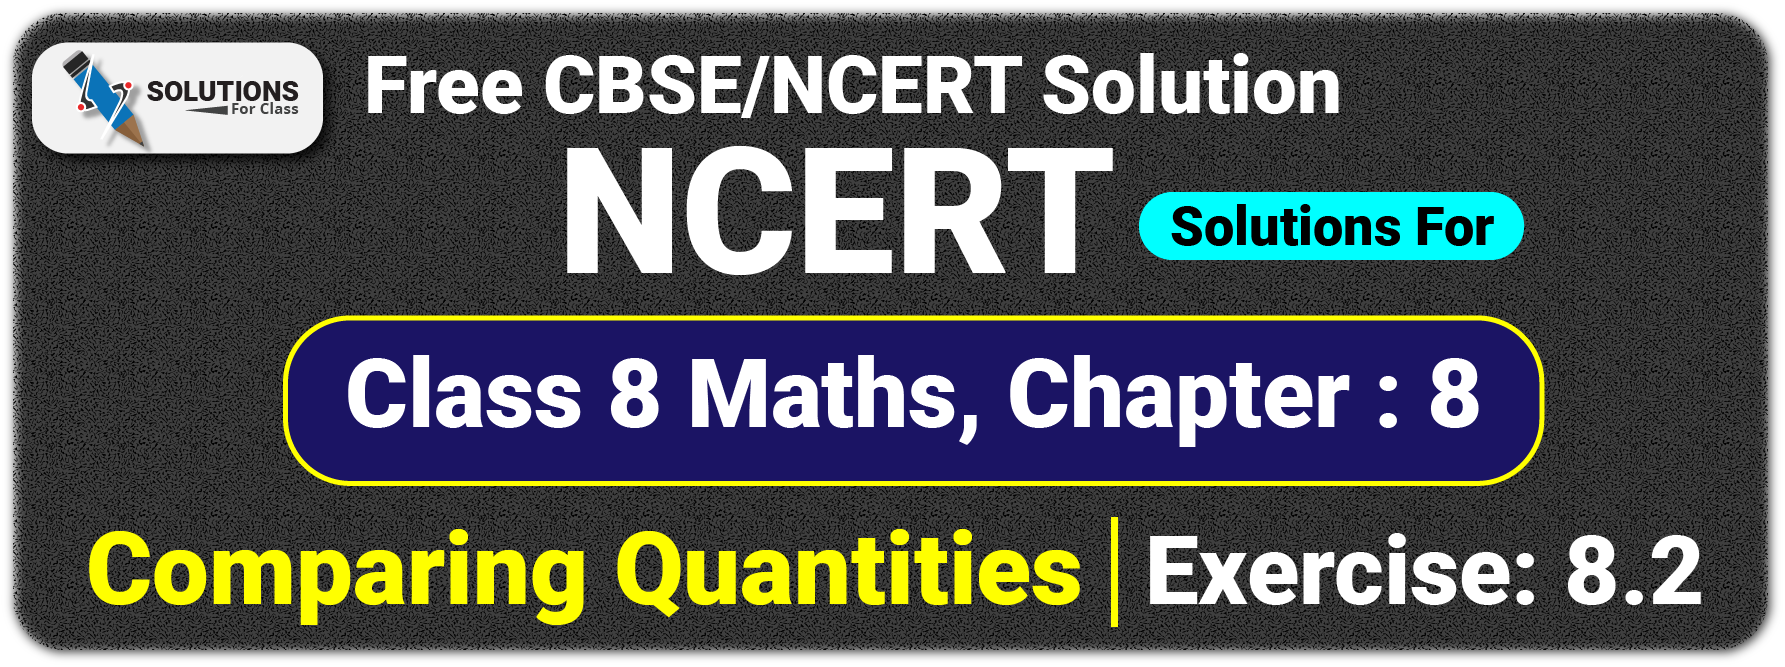 NCERT Solutions For Class 8 Chapter 8, Comparing Quantities, Exercise 8.2